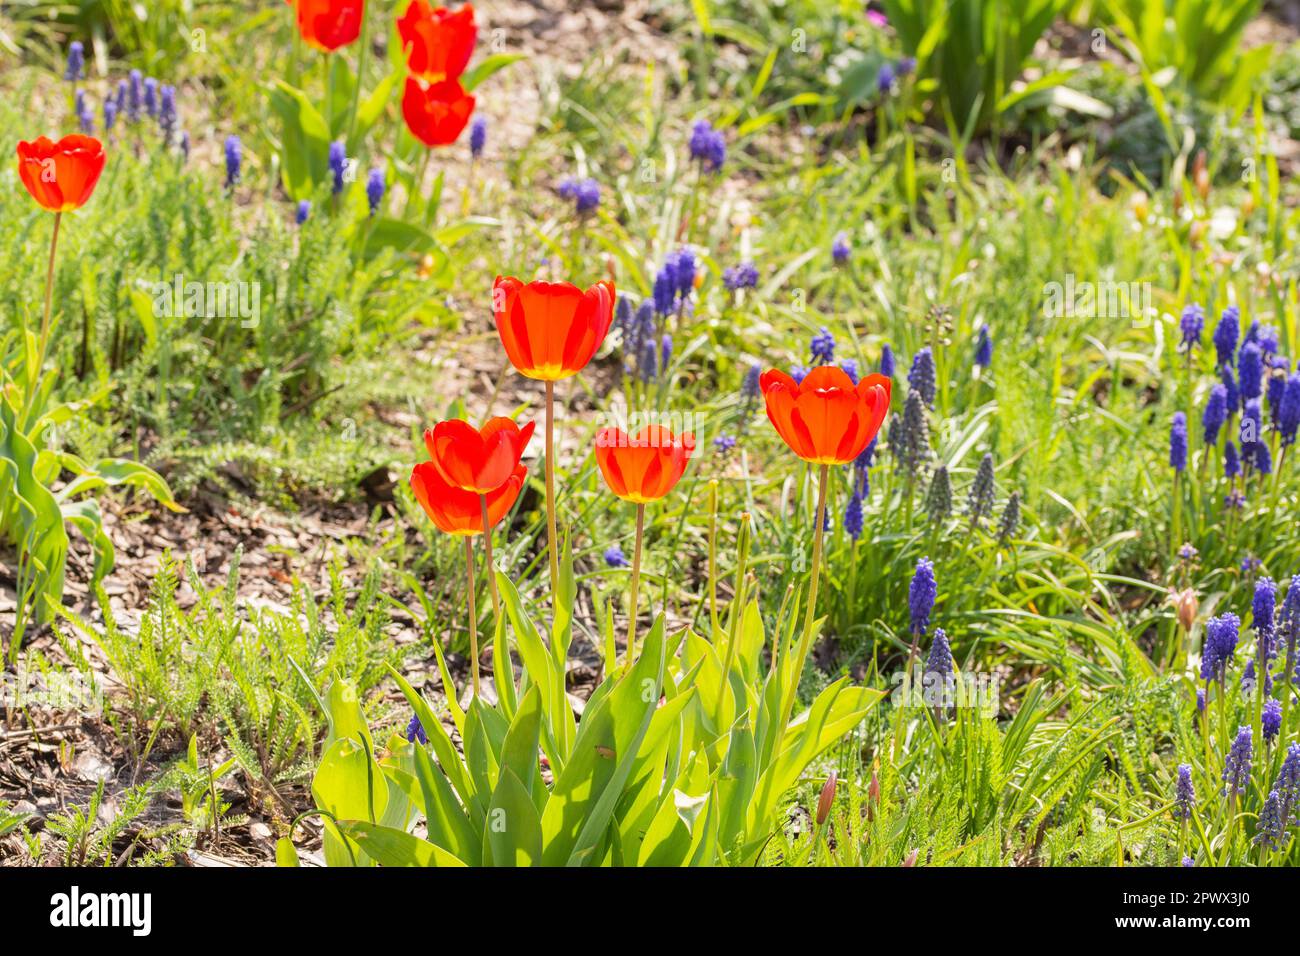 Red tulips and purple flowers on a green grass carpet in bright sunlight. Spring. Day. Stock Photo